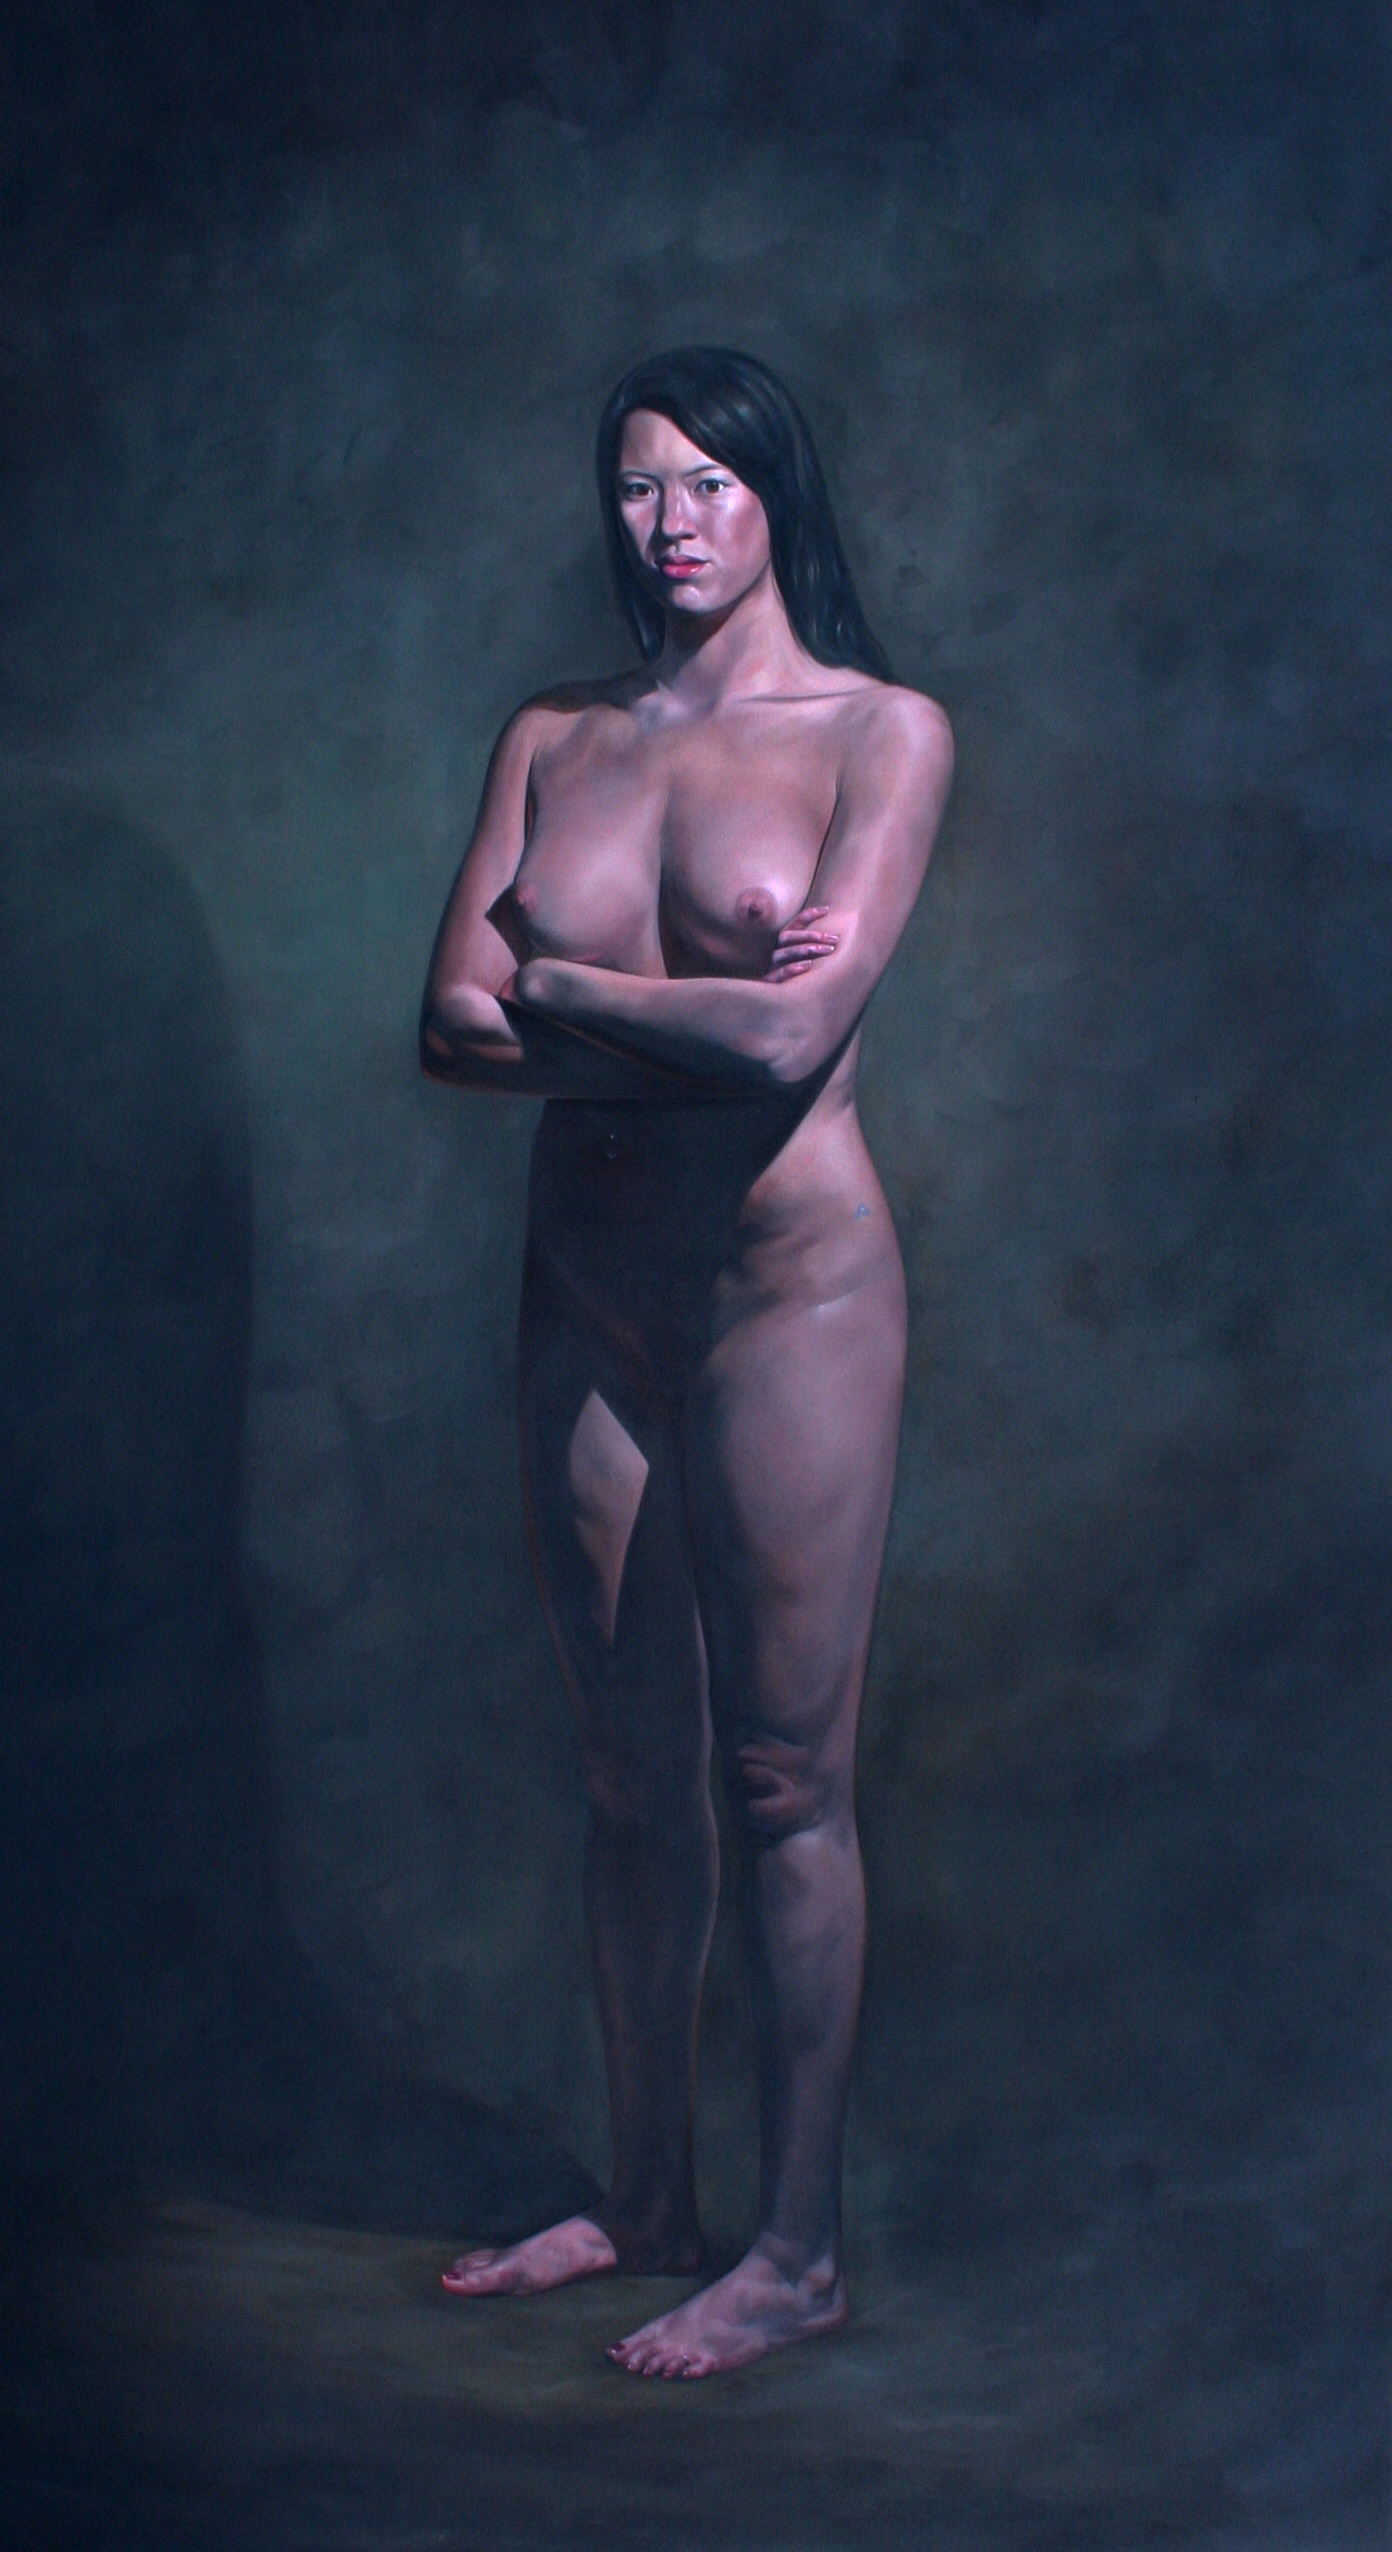 Standing Nude, painting by British painter Nicholas C Williams. Held in the collection of the Frissaris Museum, Athens.